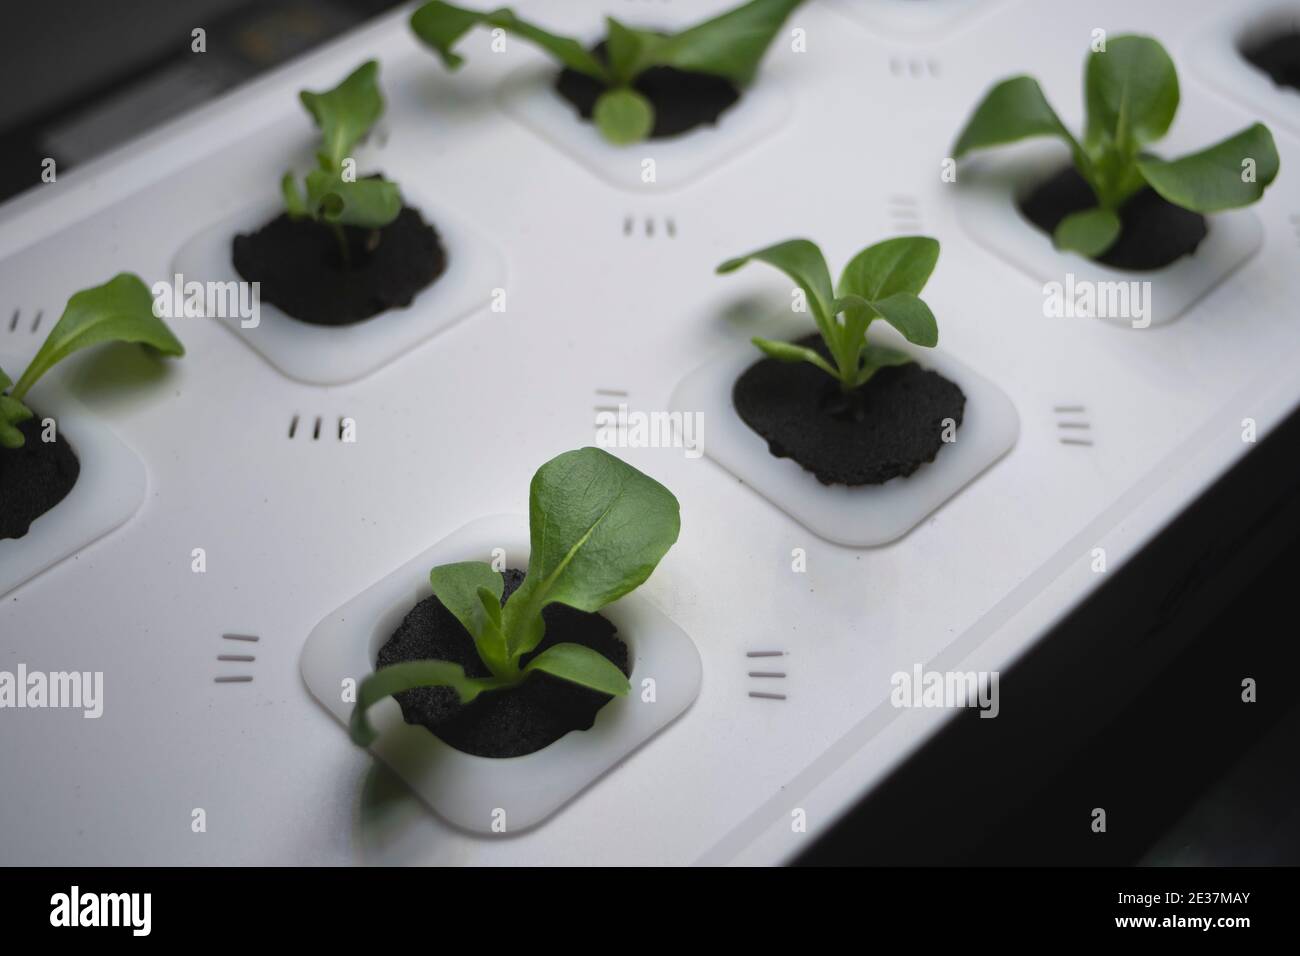 Lettuce growing in a home hydroponic unit Stock Photo